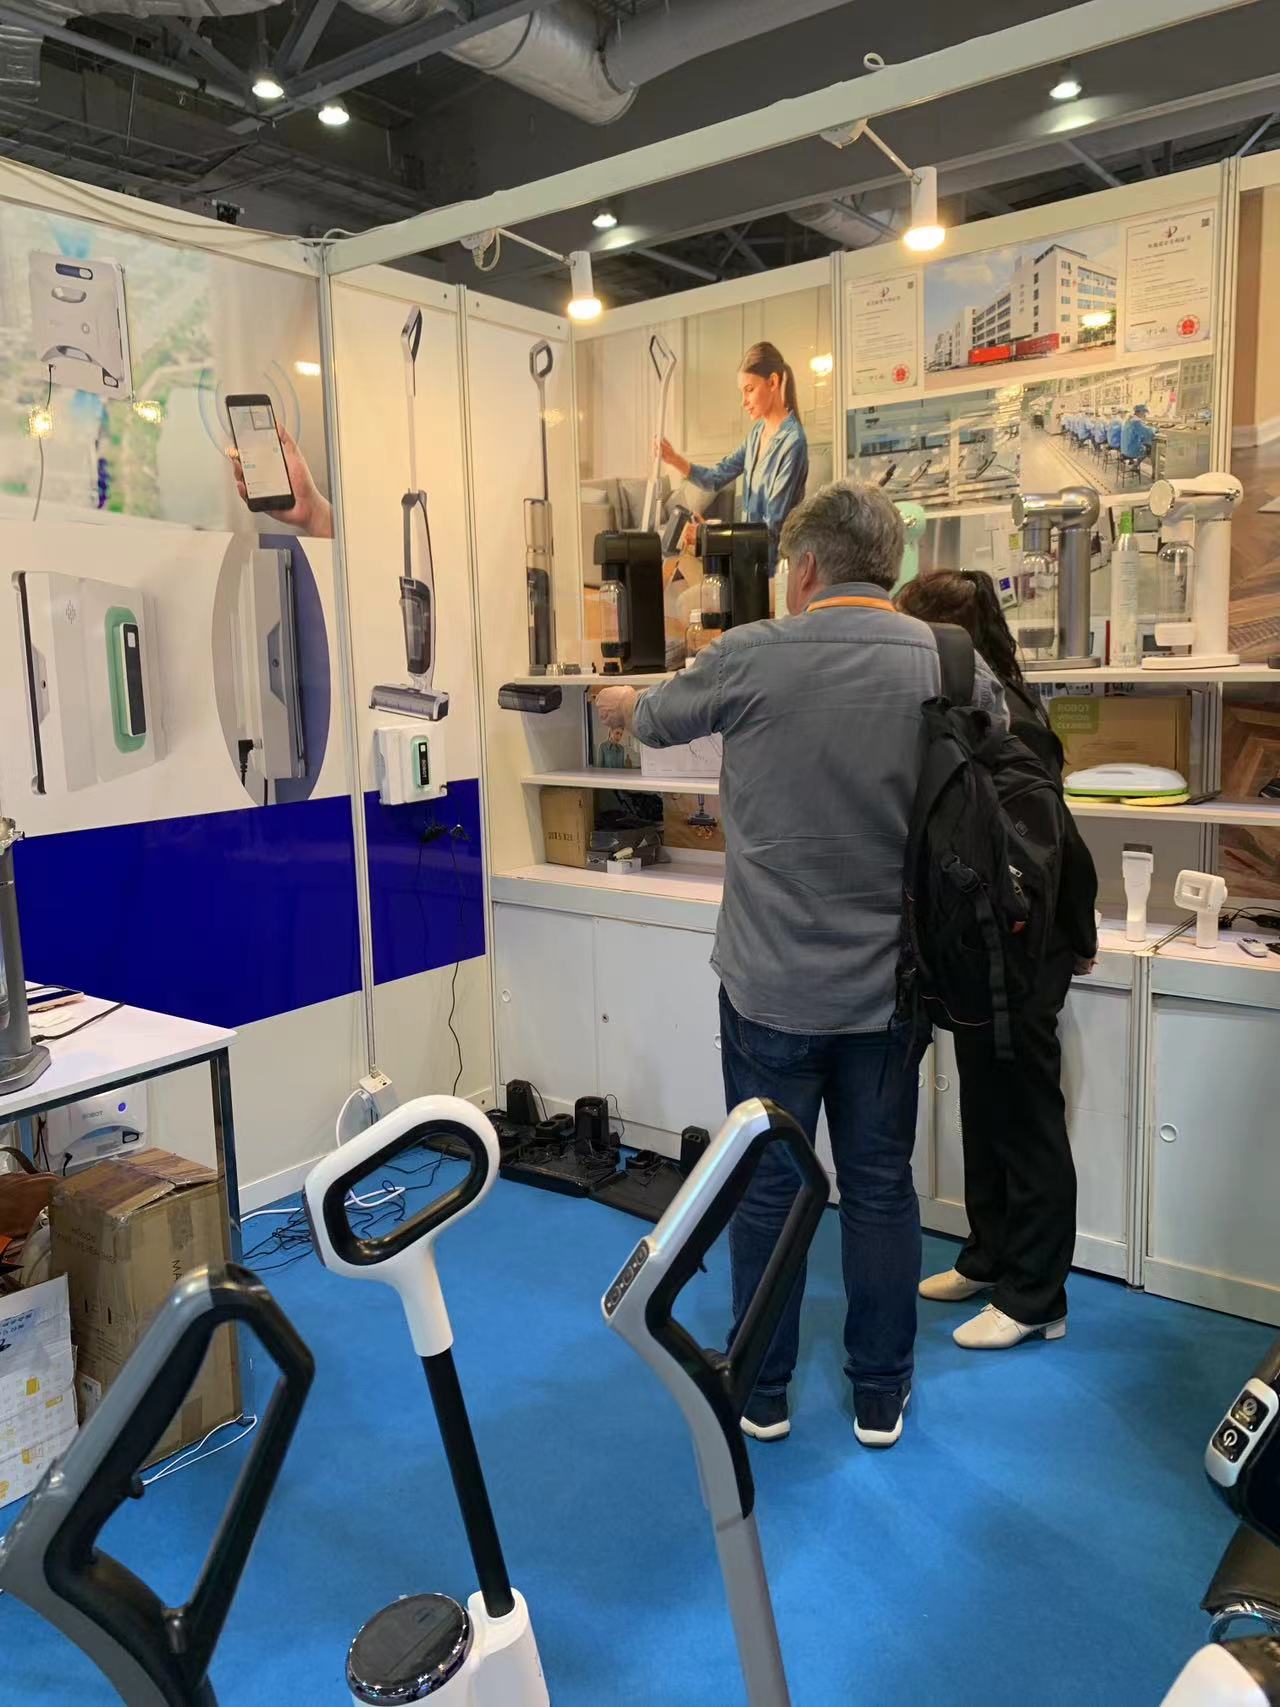 Bengbu MiFan Technology Co., Ltd Invites Visitors to Explore Innovative Cleaning Tools at Global Sources Exhibitions in Hong Kong - Notícias da empresa - 2